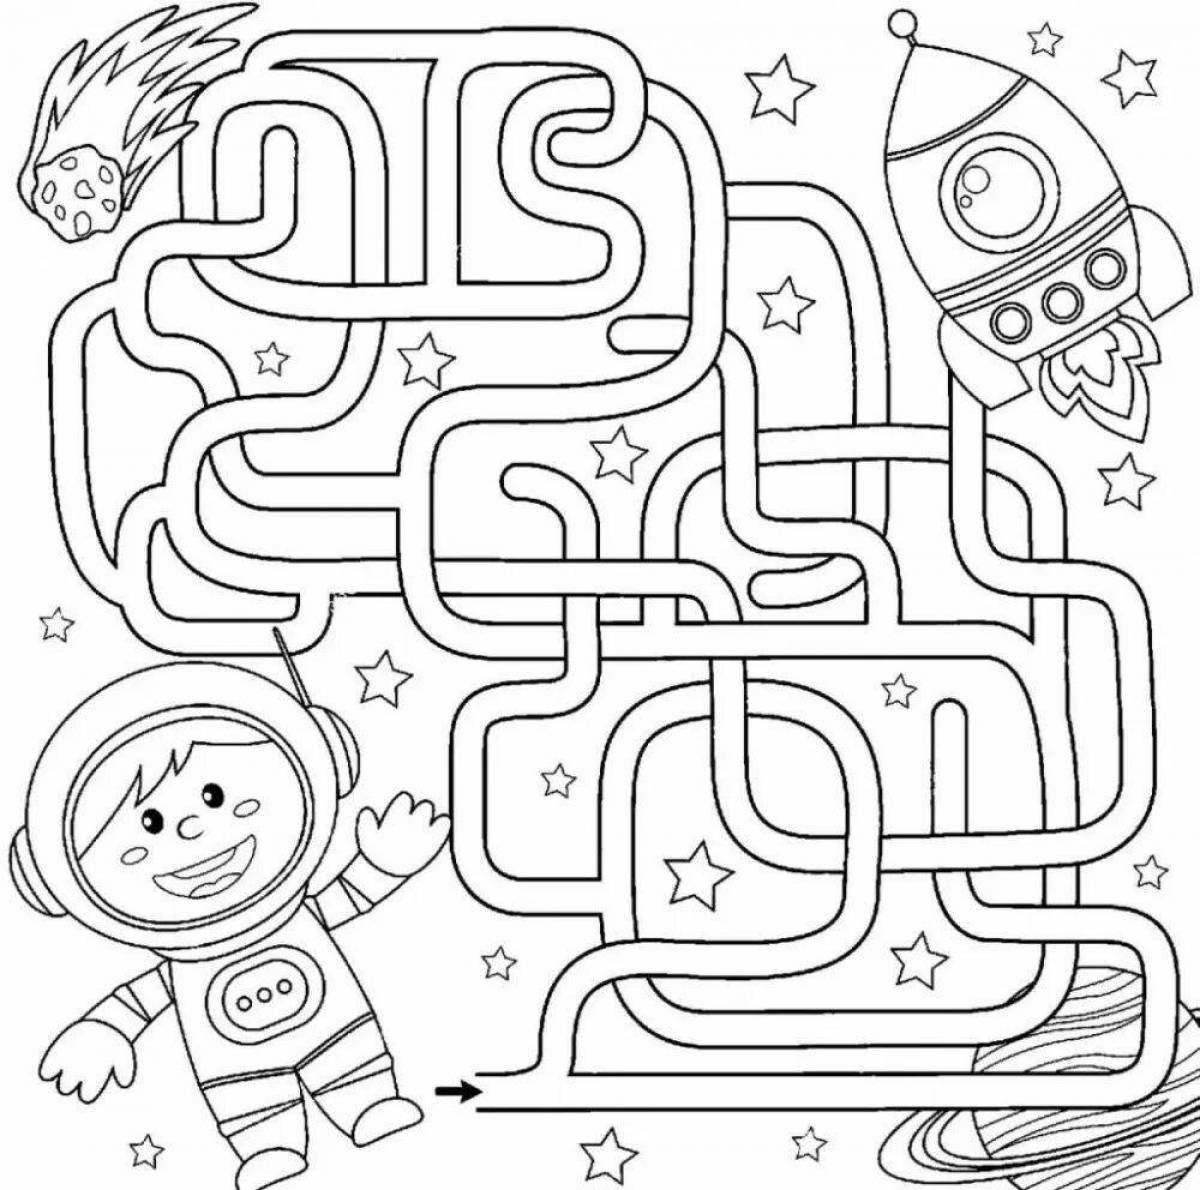 Complex coloring for boys maze